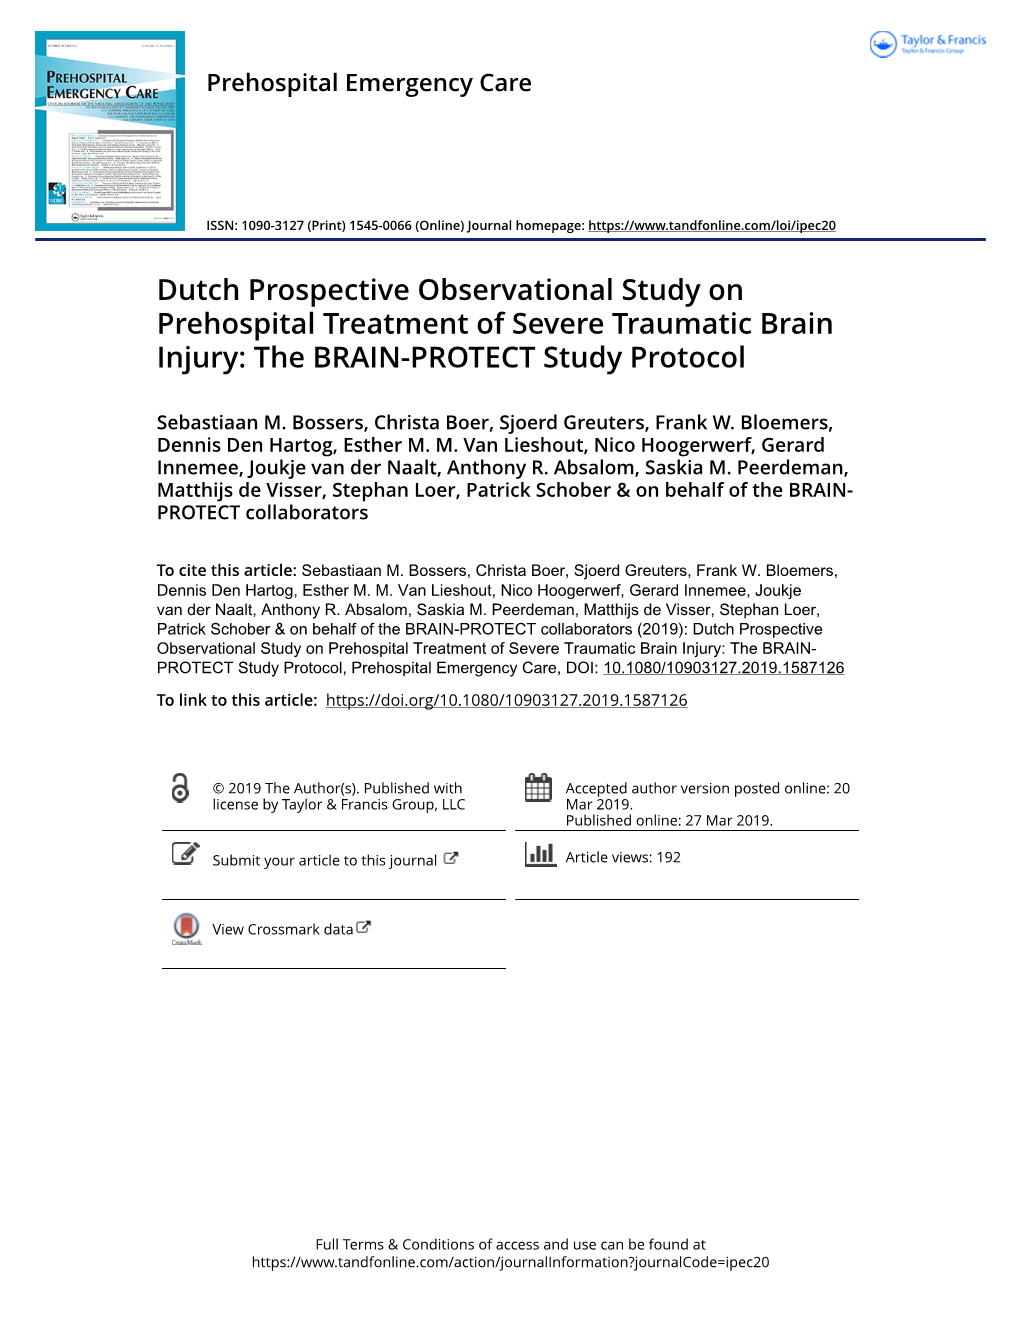 Dutch Prospective Observational Study on Prehospital Treatment of Severe Traumatic Brain Injury: the BRAIN-PROTECT Study Protocol